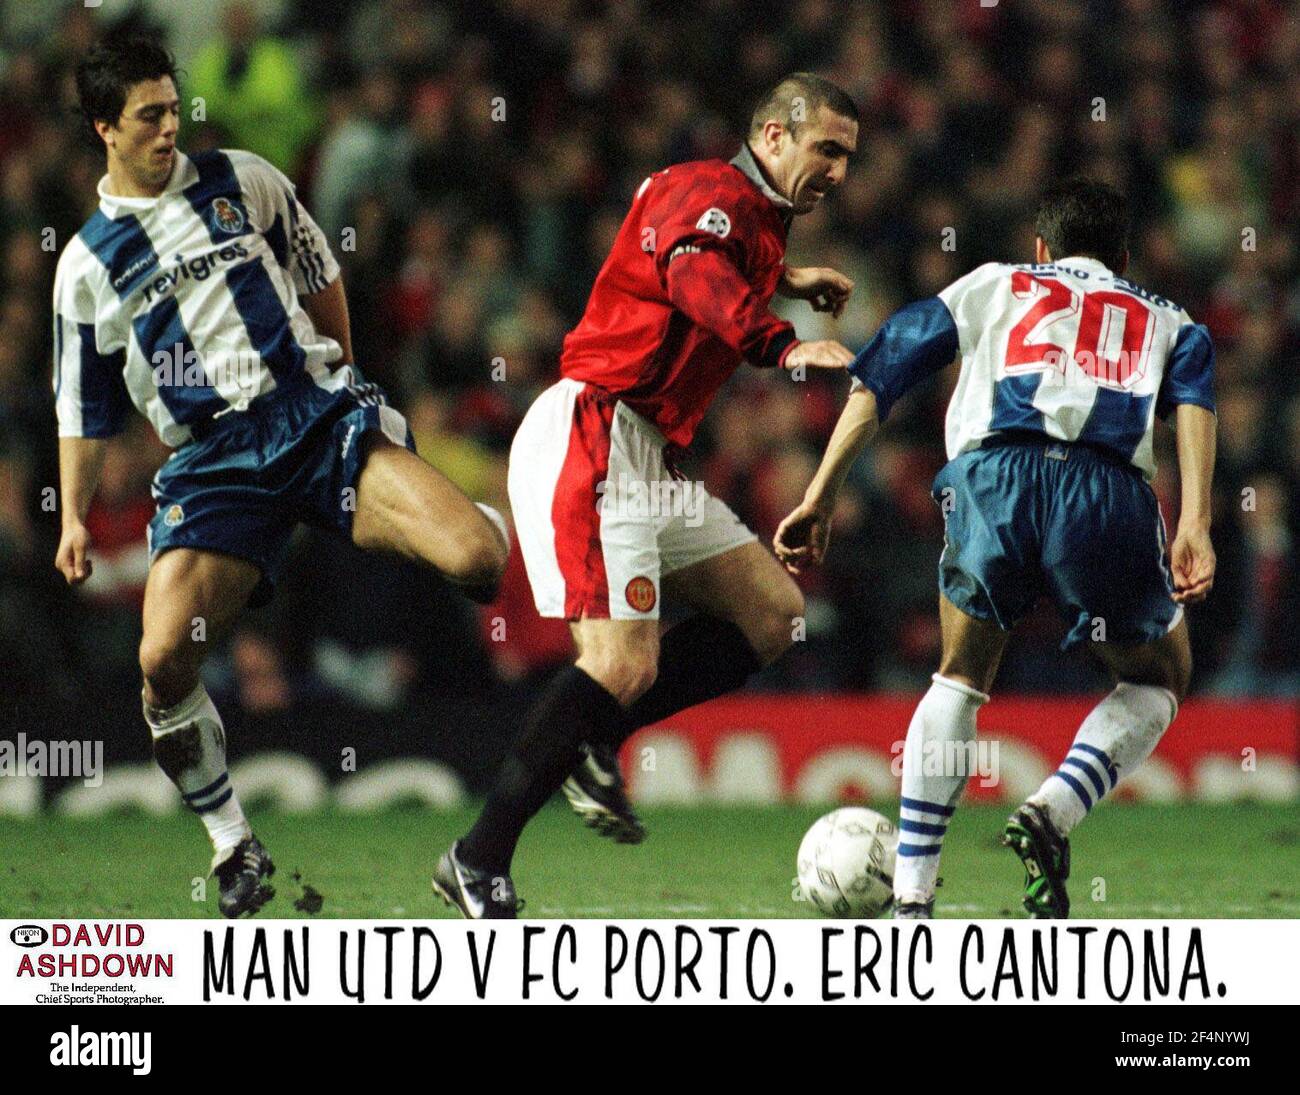 Eric Cantona takes the ball past players for F.C. Porto during the Manchester United V F.C. Porto UEFA Cup match at the Old Trafford Stock Photo